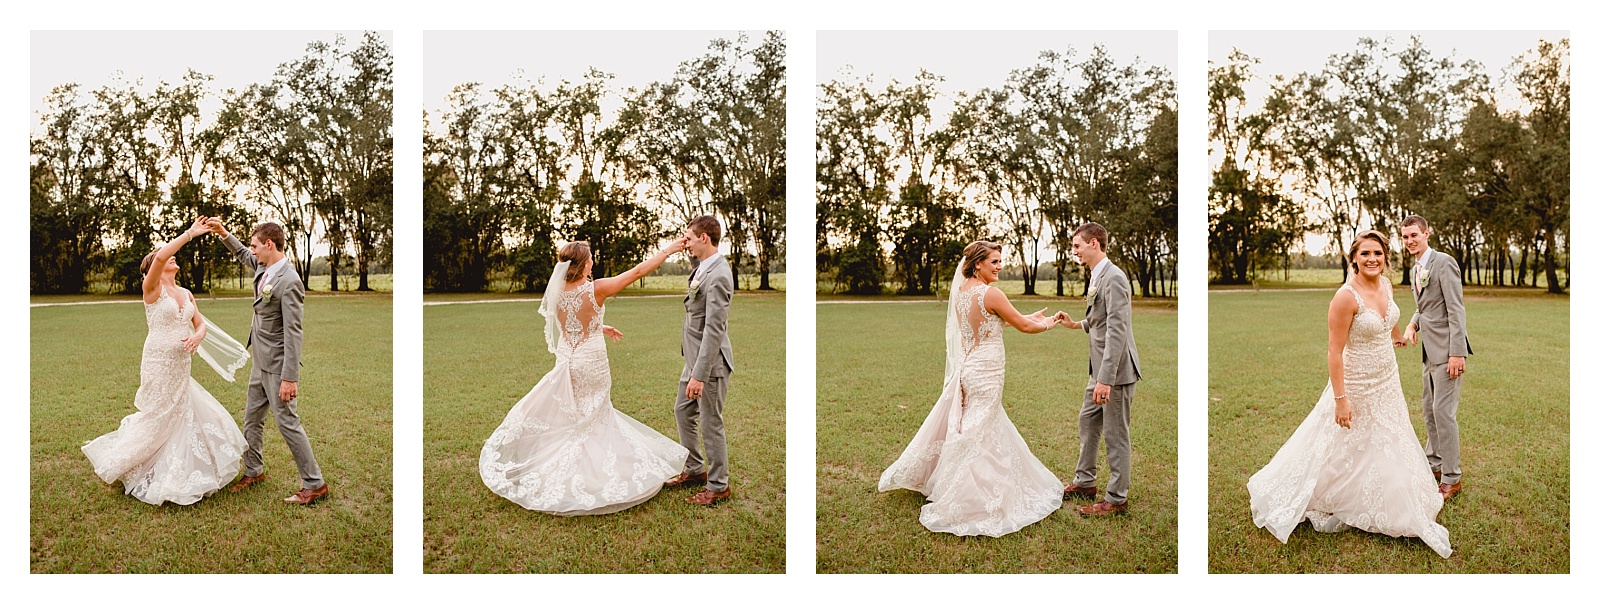 Bride and groom dancing under the sunset on their wedding day in Lake City, FL. Shelly Williams Photography